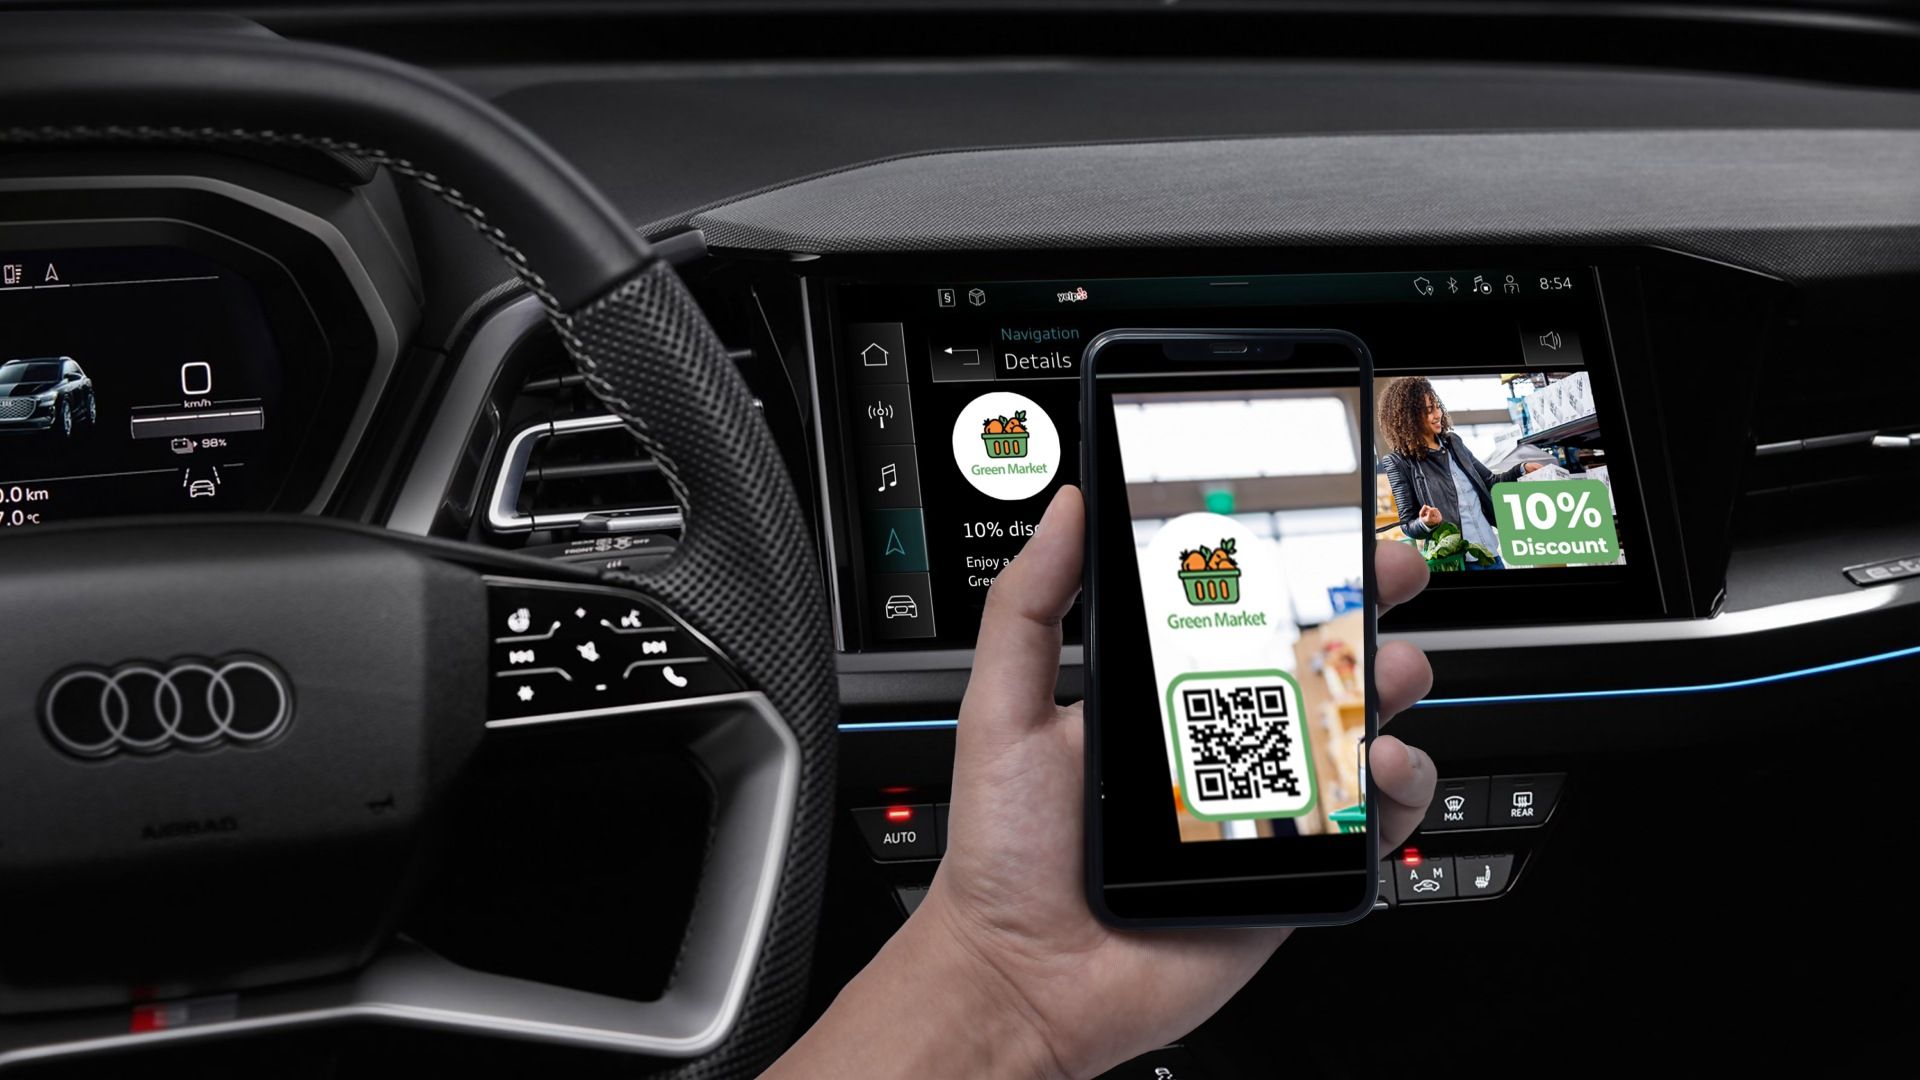 Smartphone scanning POI offer in the Audi MMI.